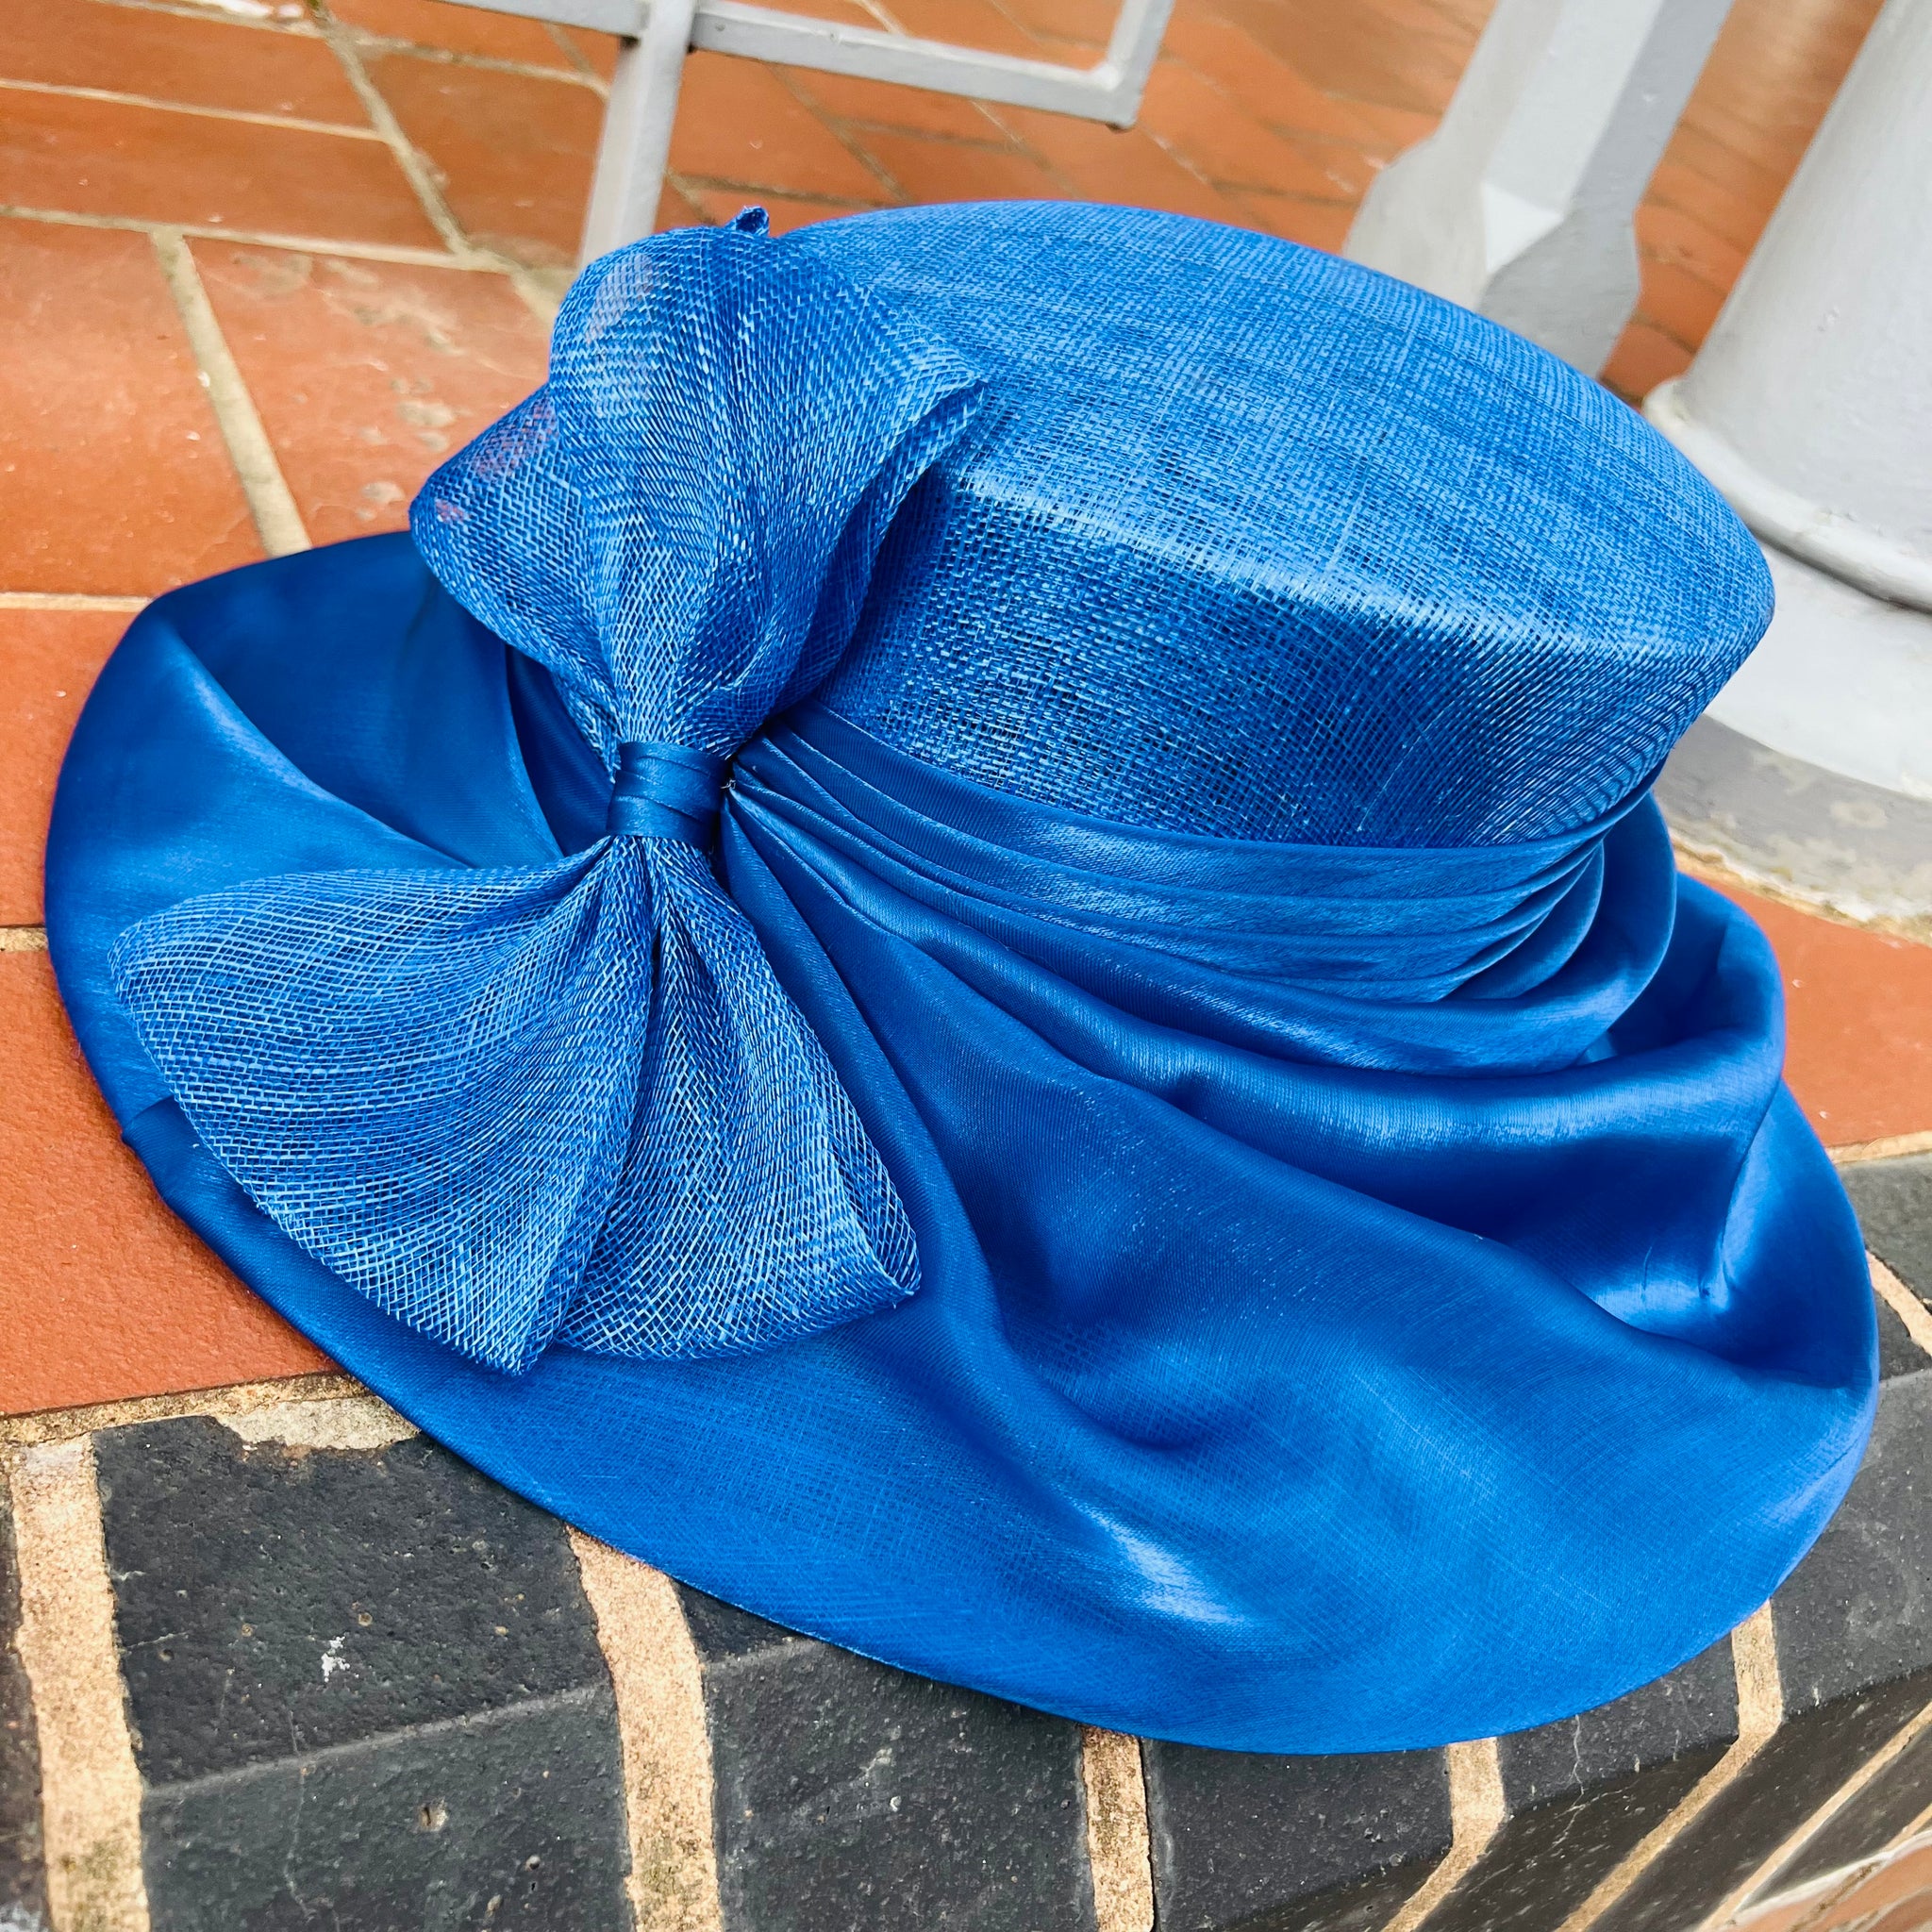 Neptune Blue Covered Sinamay Hat With Bow